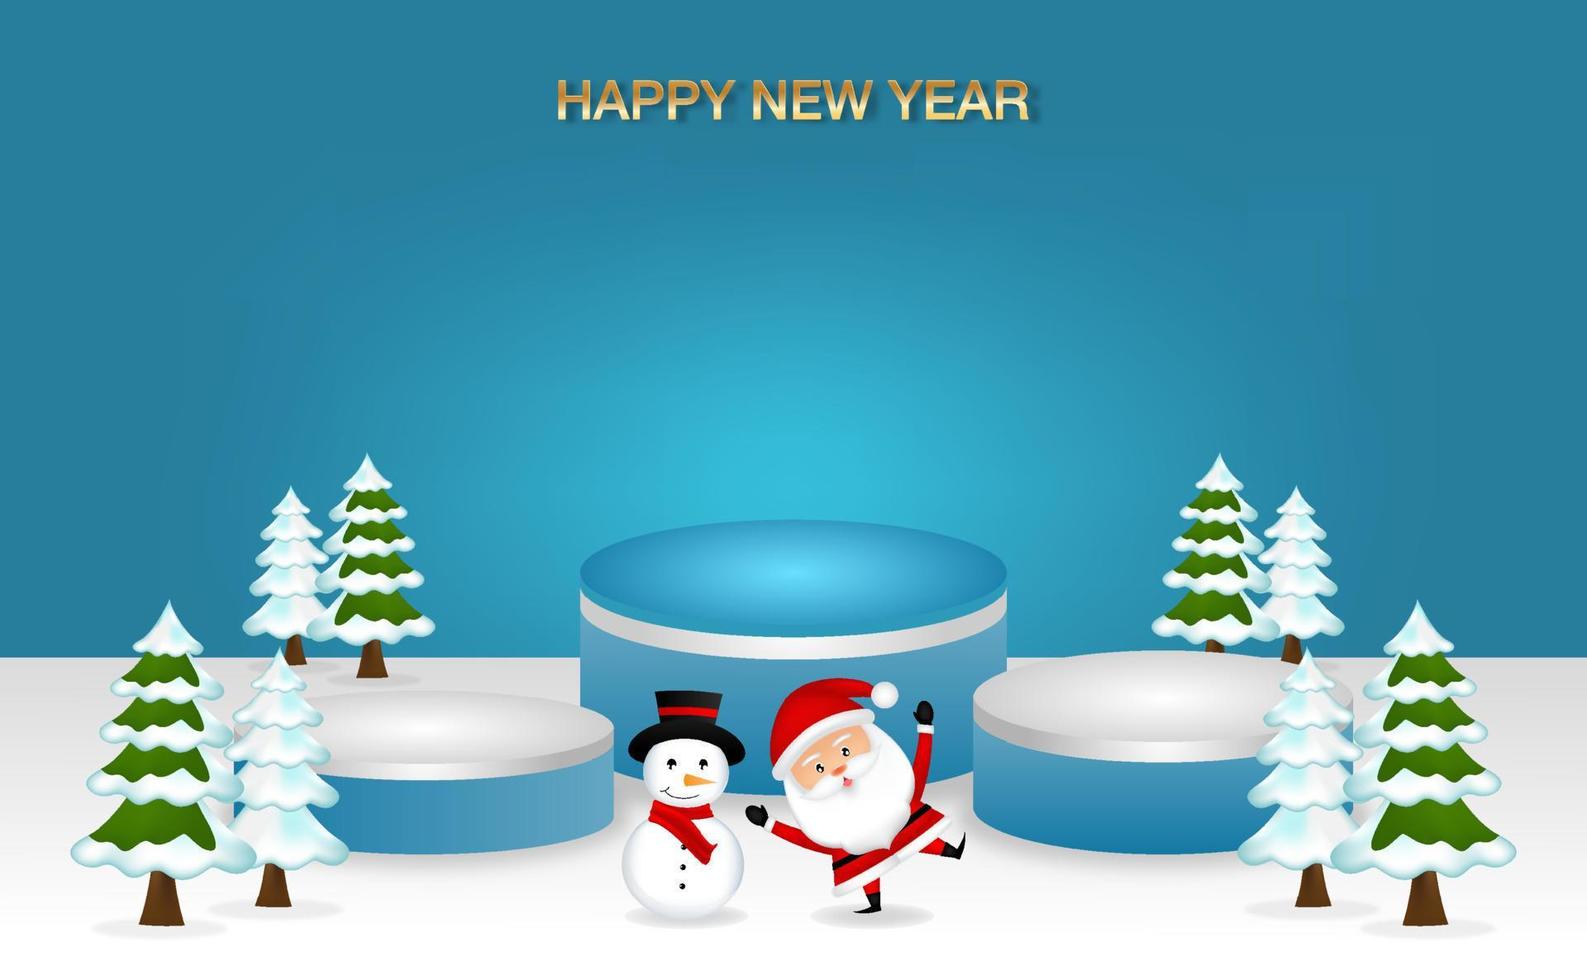 Happy new year gold and red colors place for text with christmas balls 2022 of vector illustration.